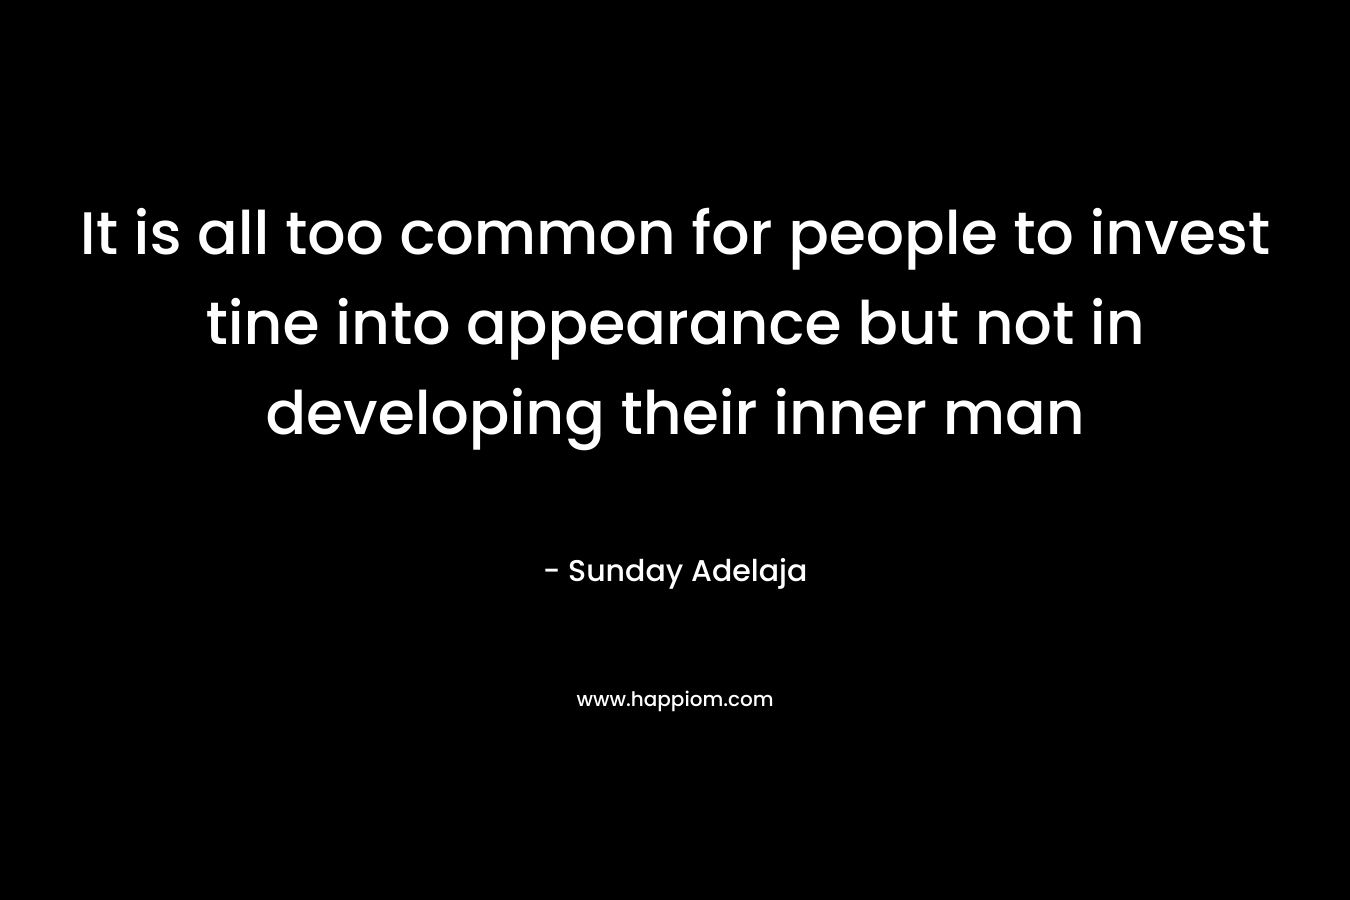 It is all too common for people to invest tine into appearance but not in developing their inner man